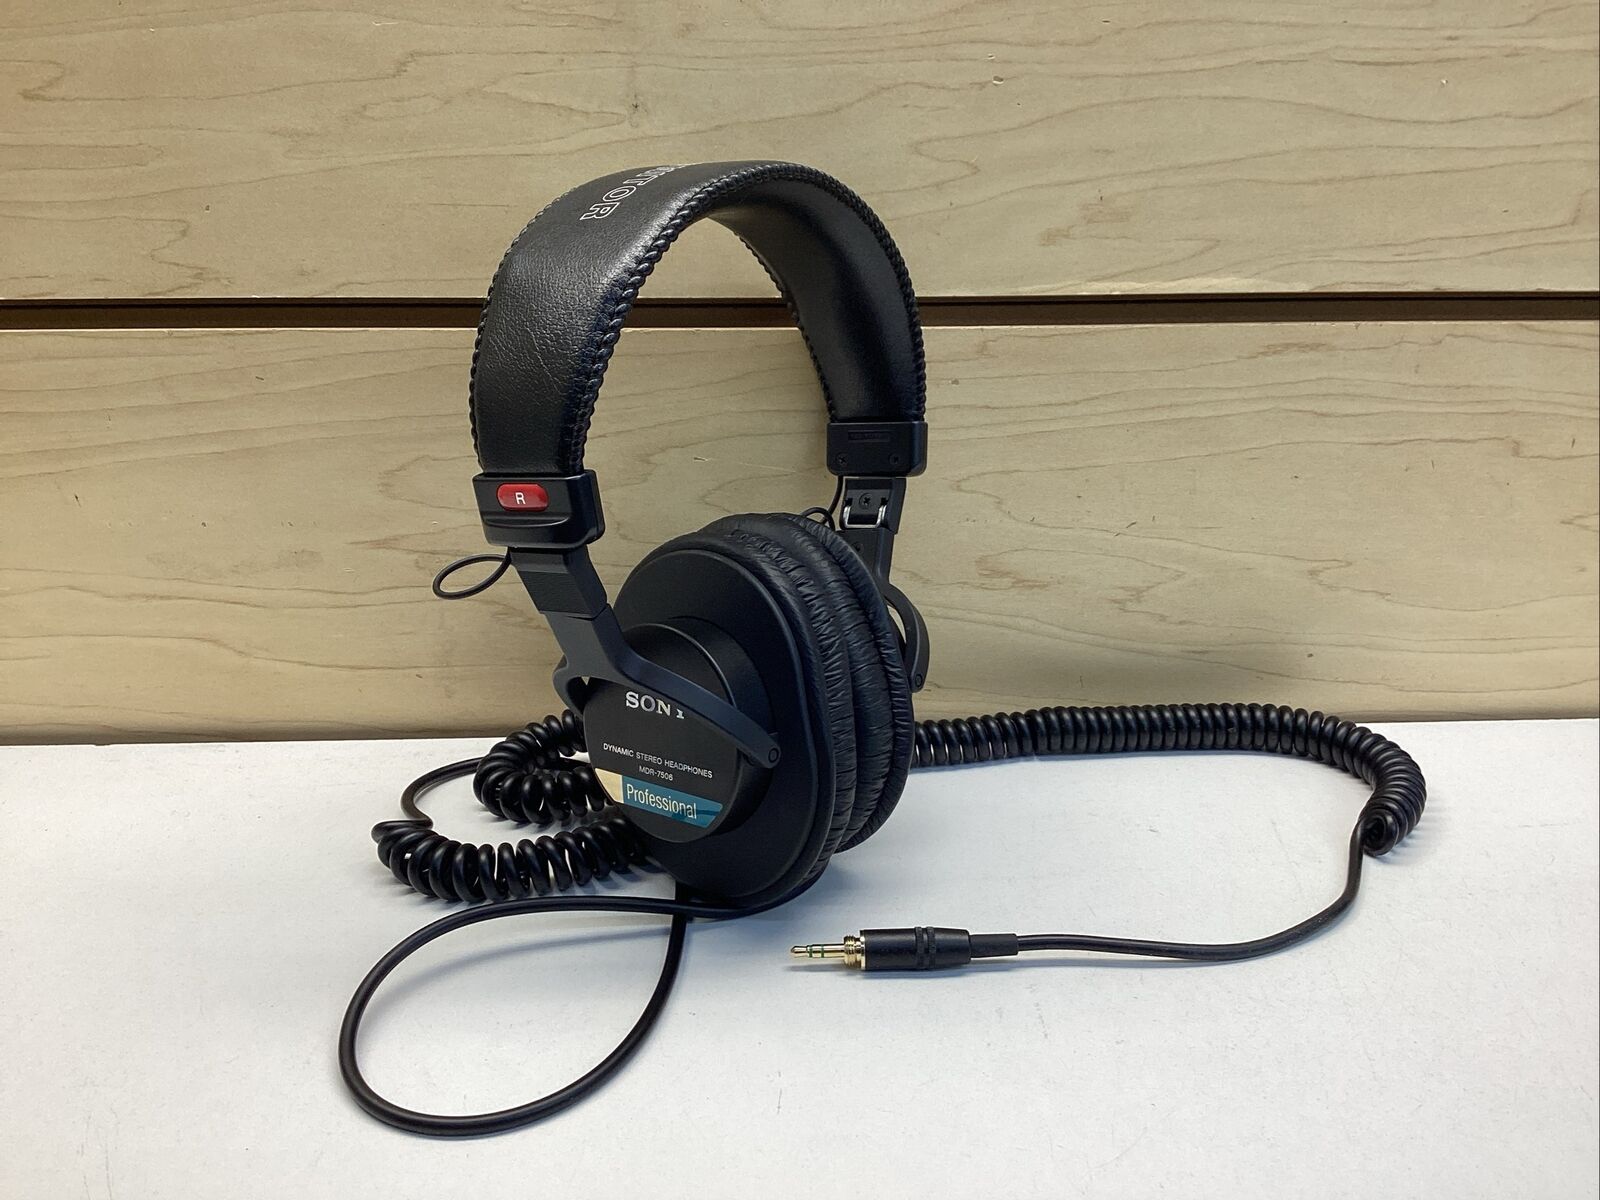 Sony Professional Mdr7506 Sound Monitor Headphones